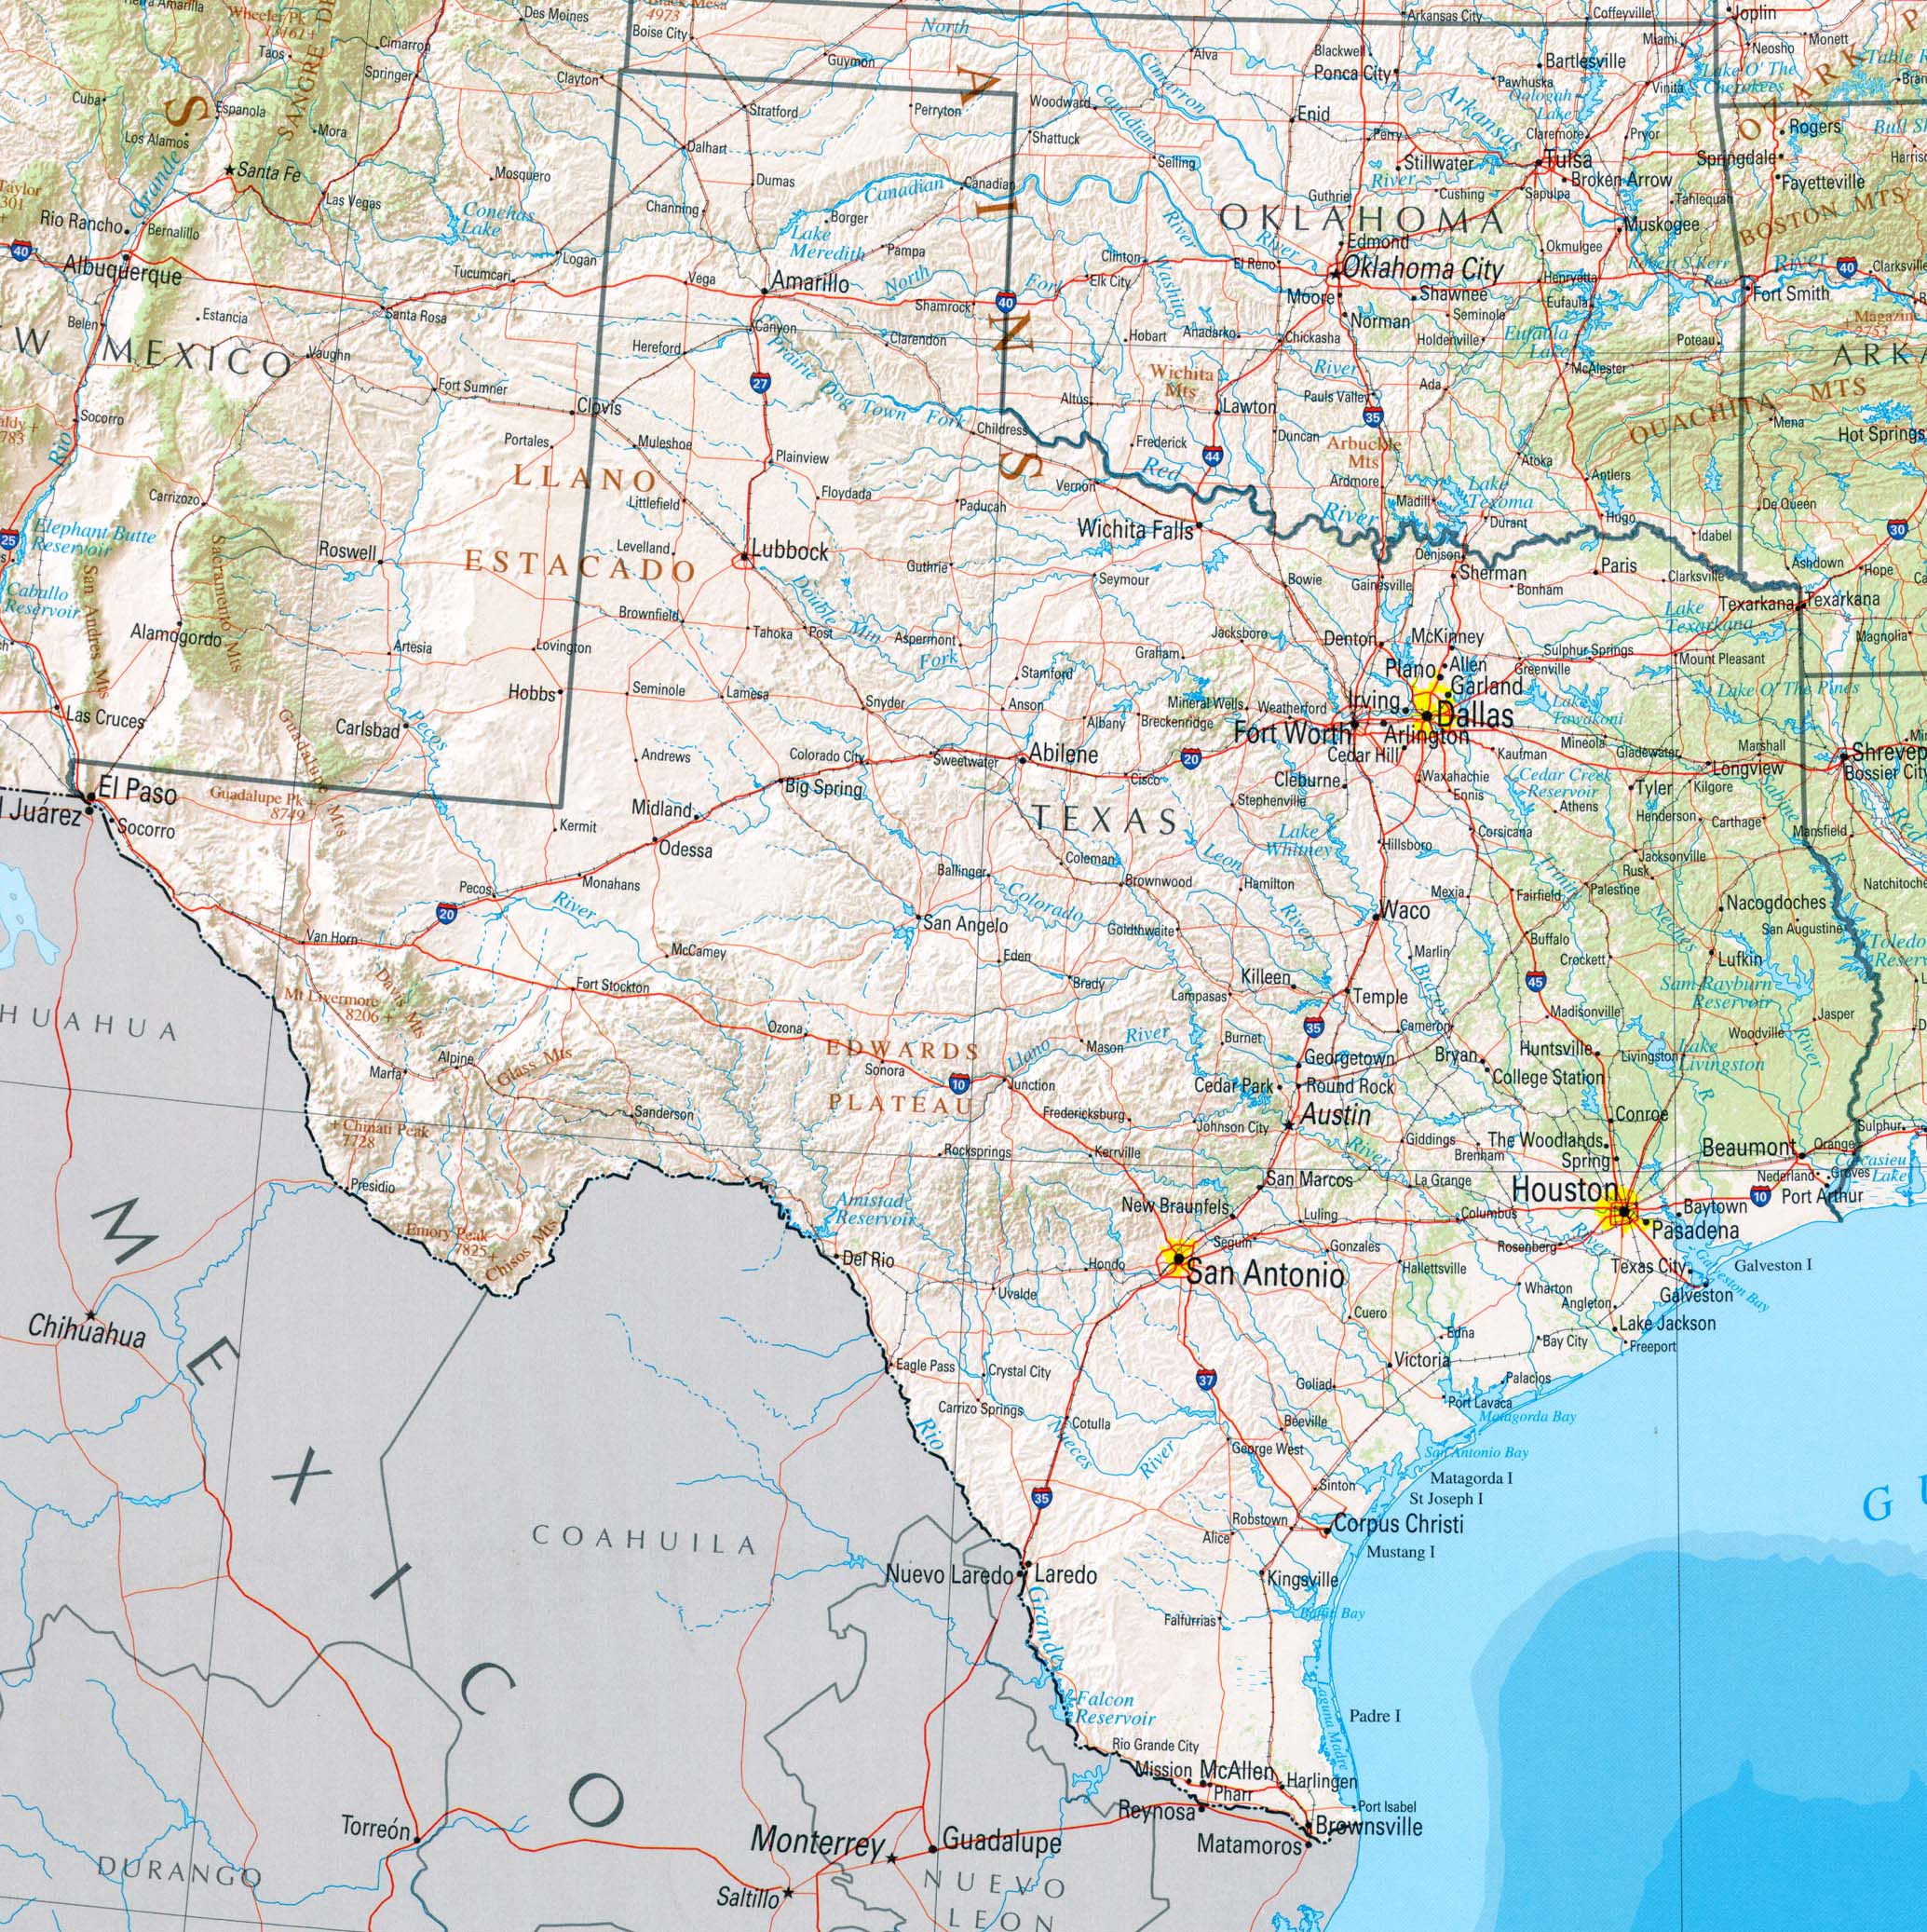 Statemaster - Statistics On Texas. Facts And Figures, Stats And - Full Map Of Texas